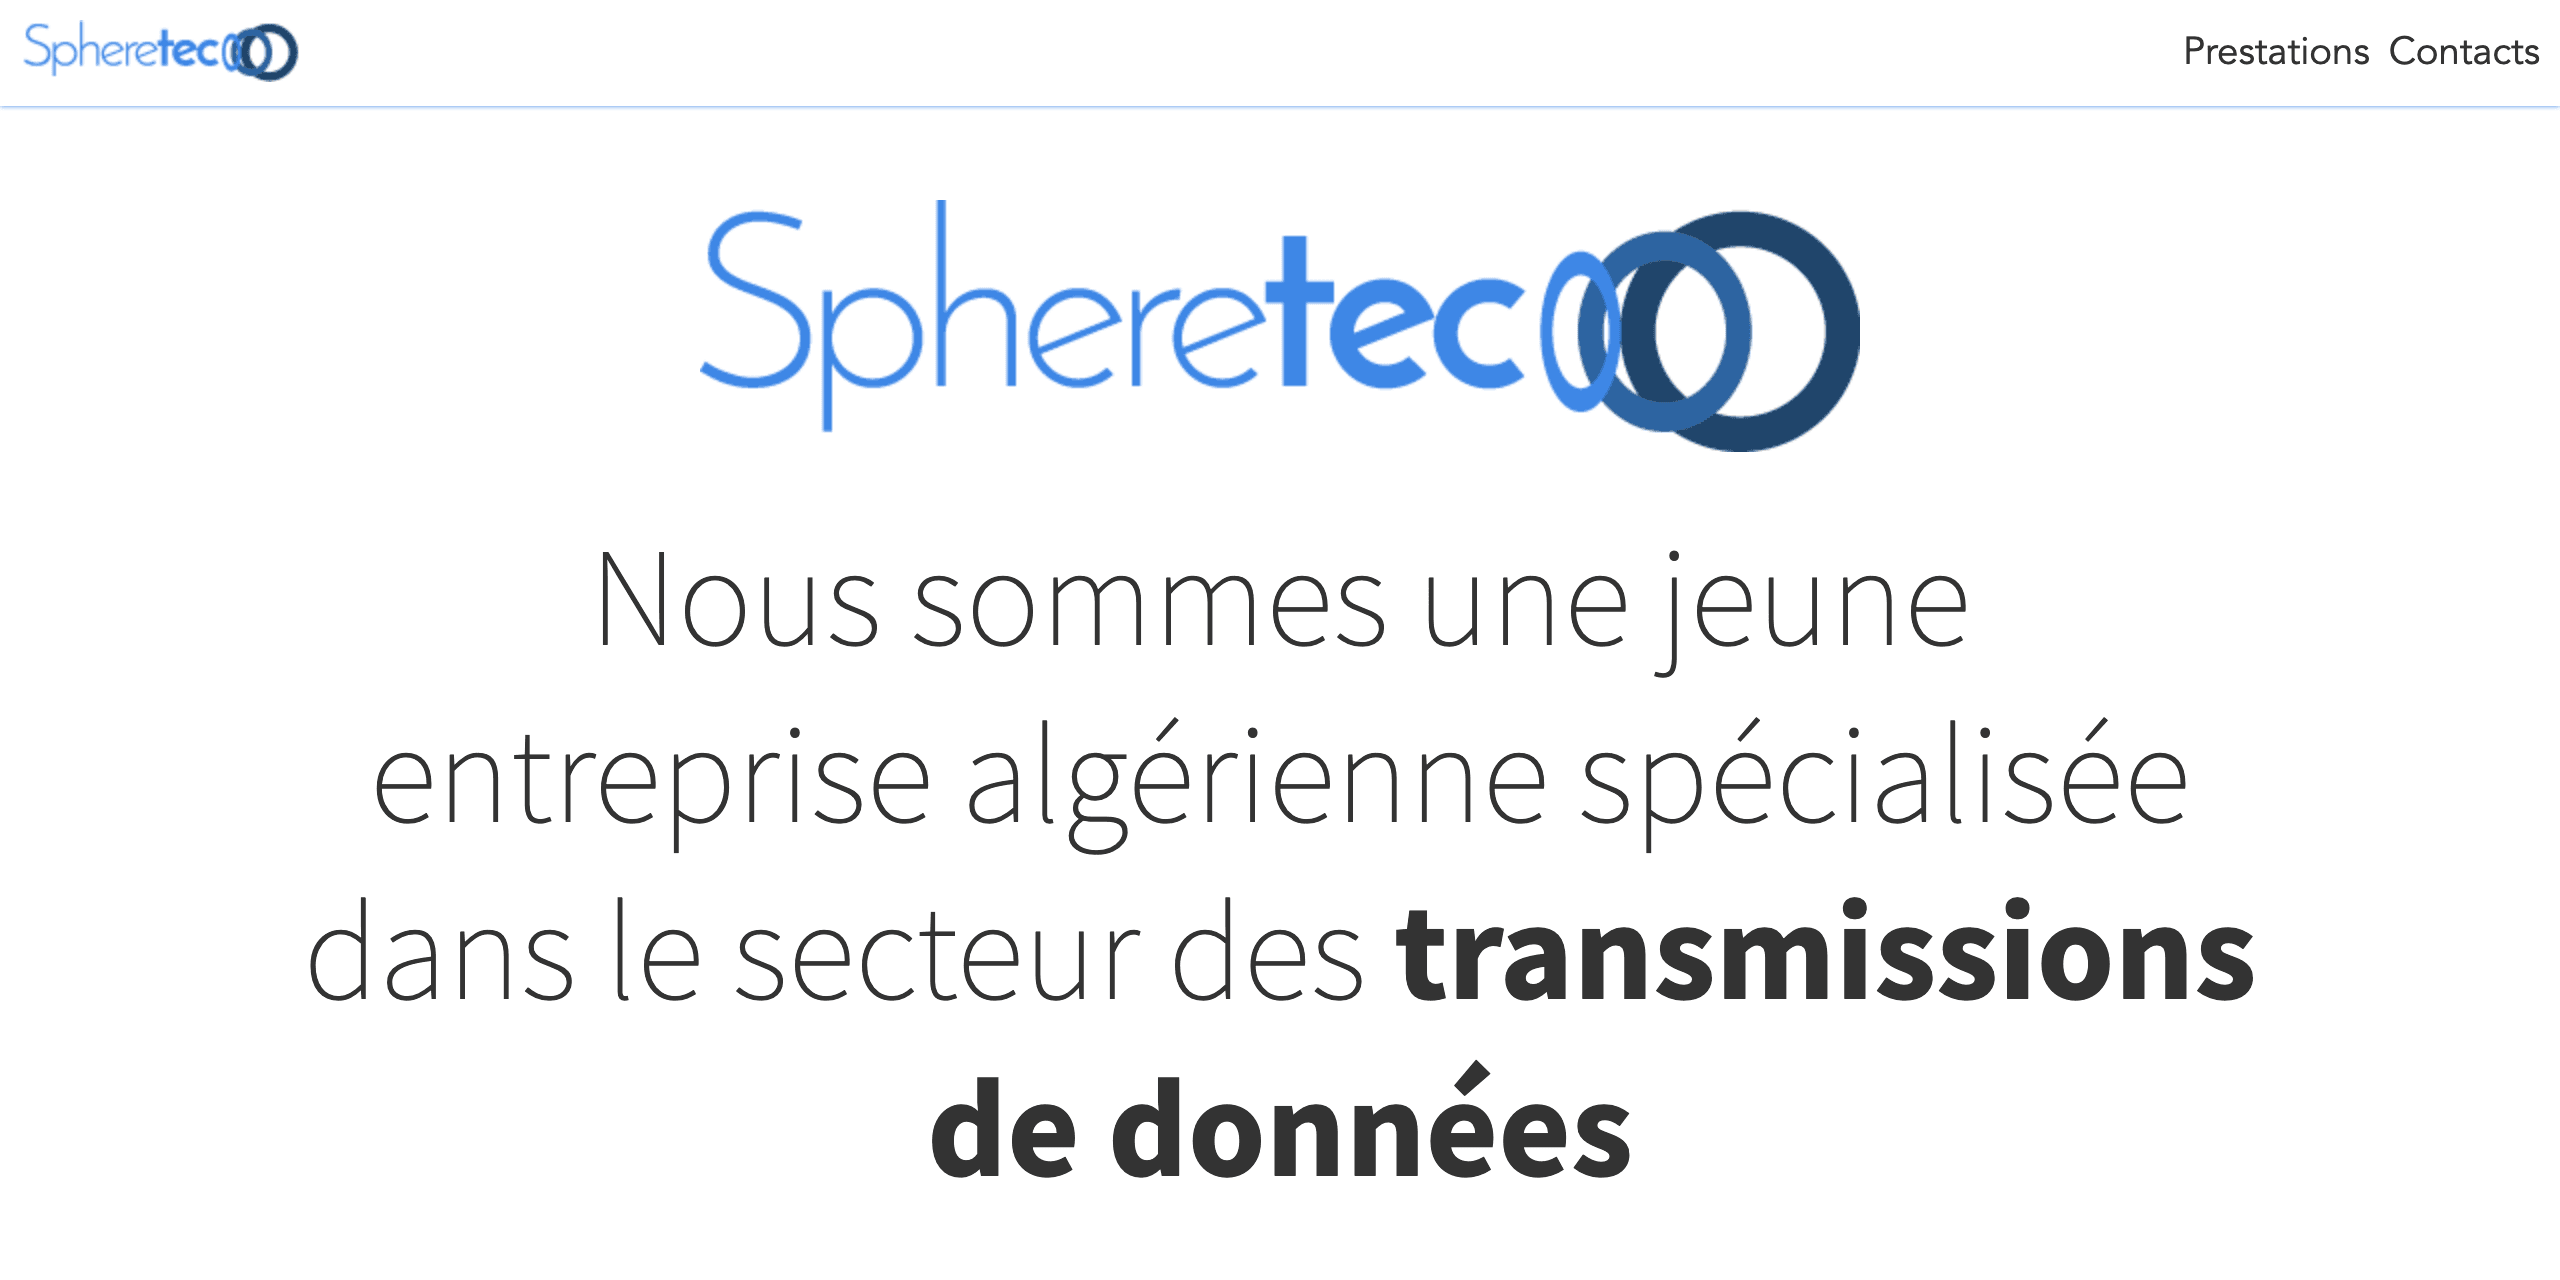 Univerweb collaborated with Spheretec on its digital presence. We created the website and we provide hosting.